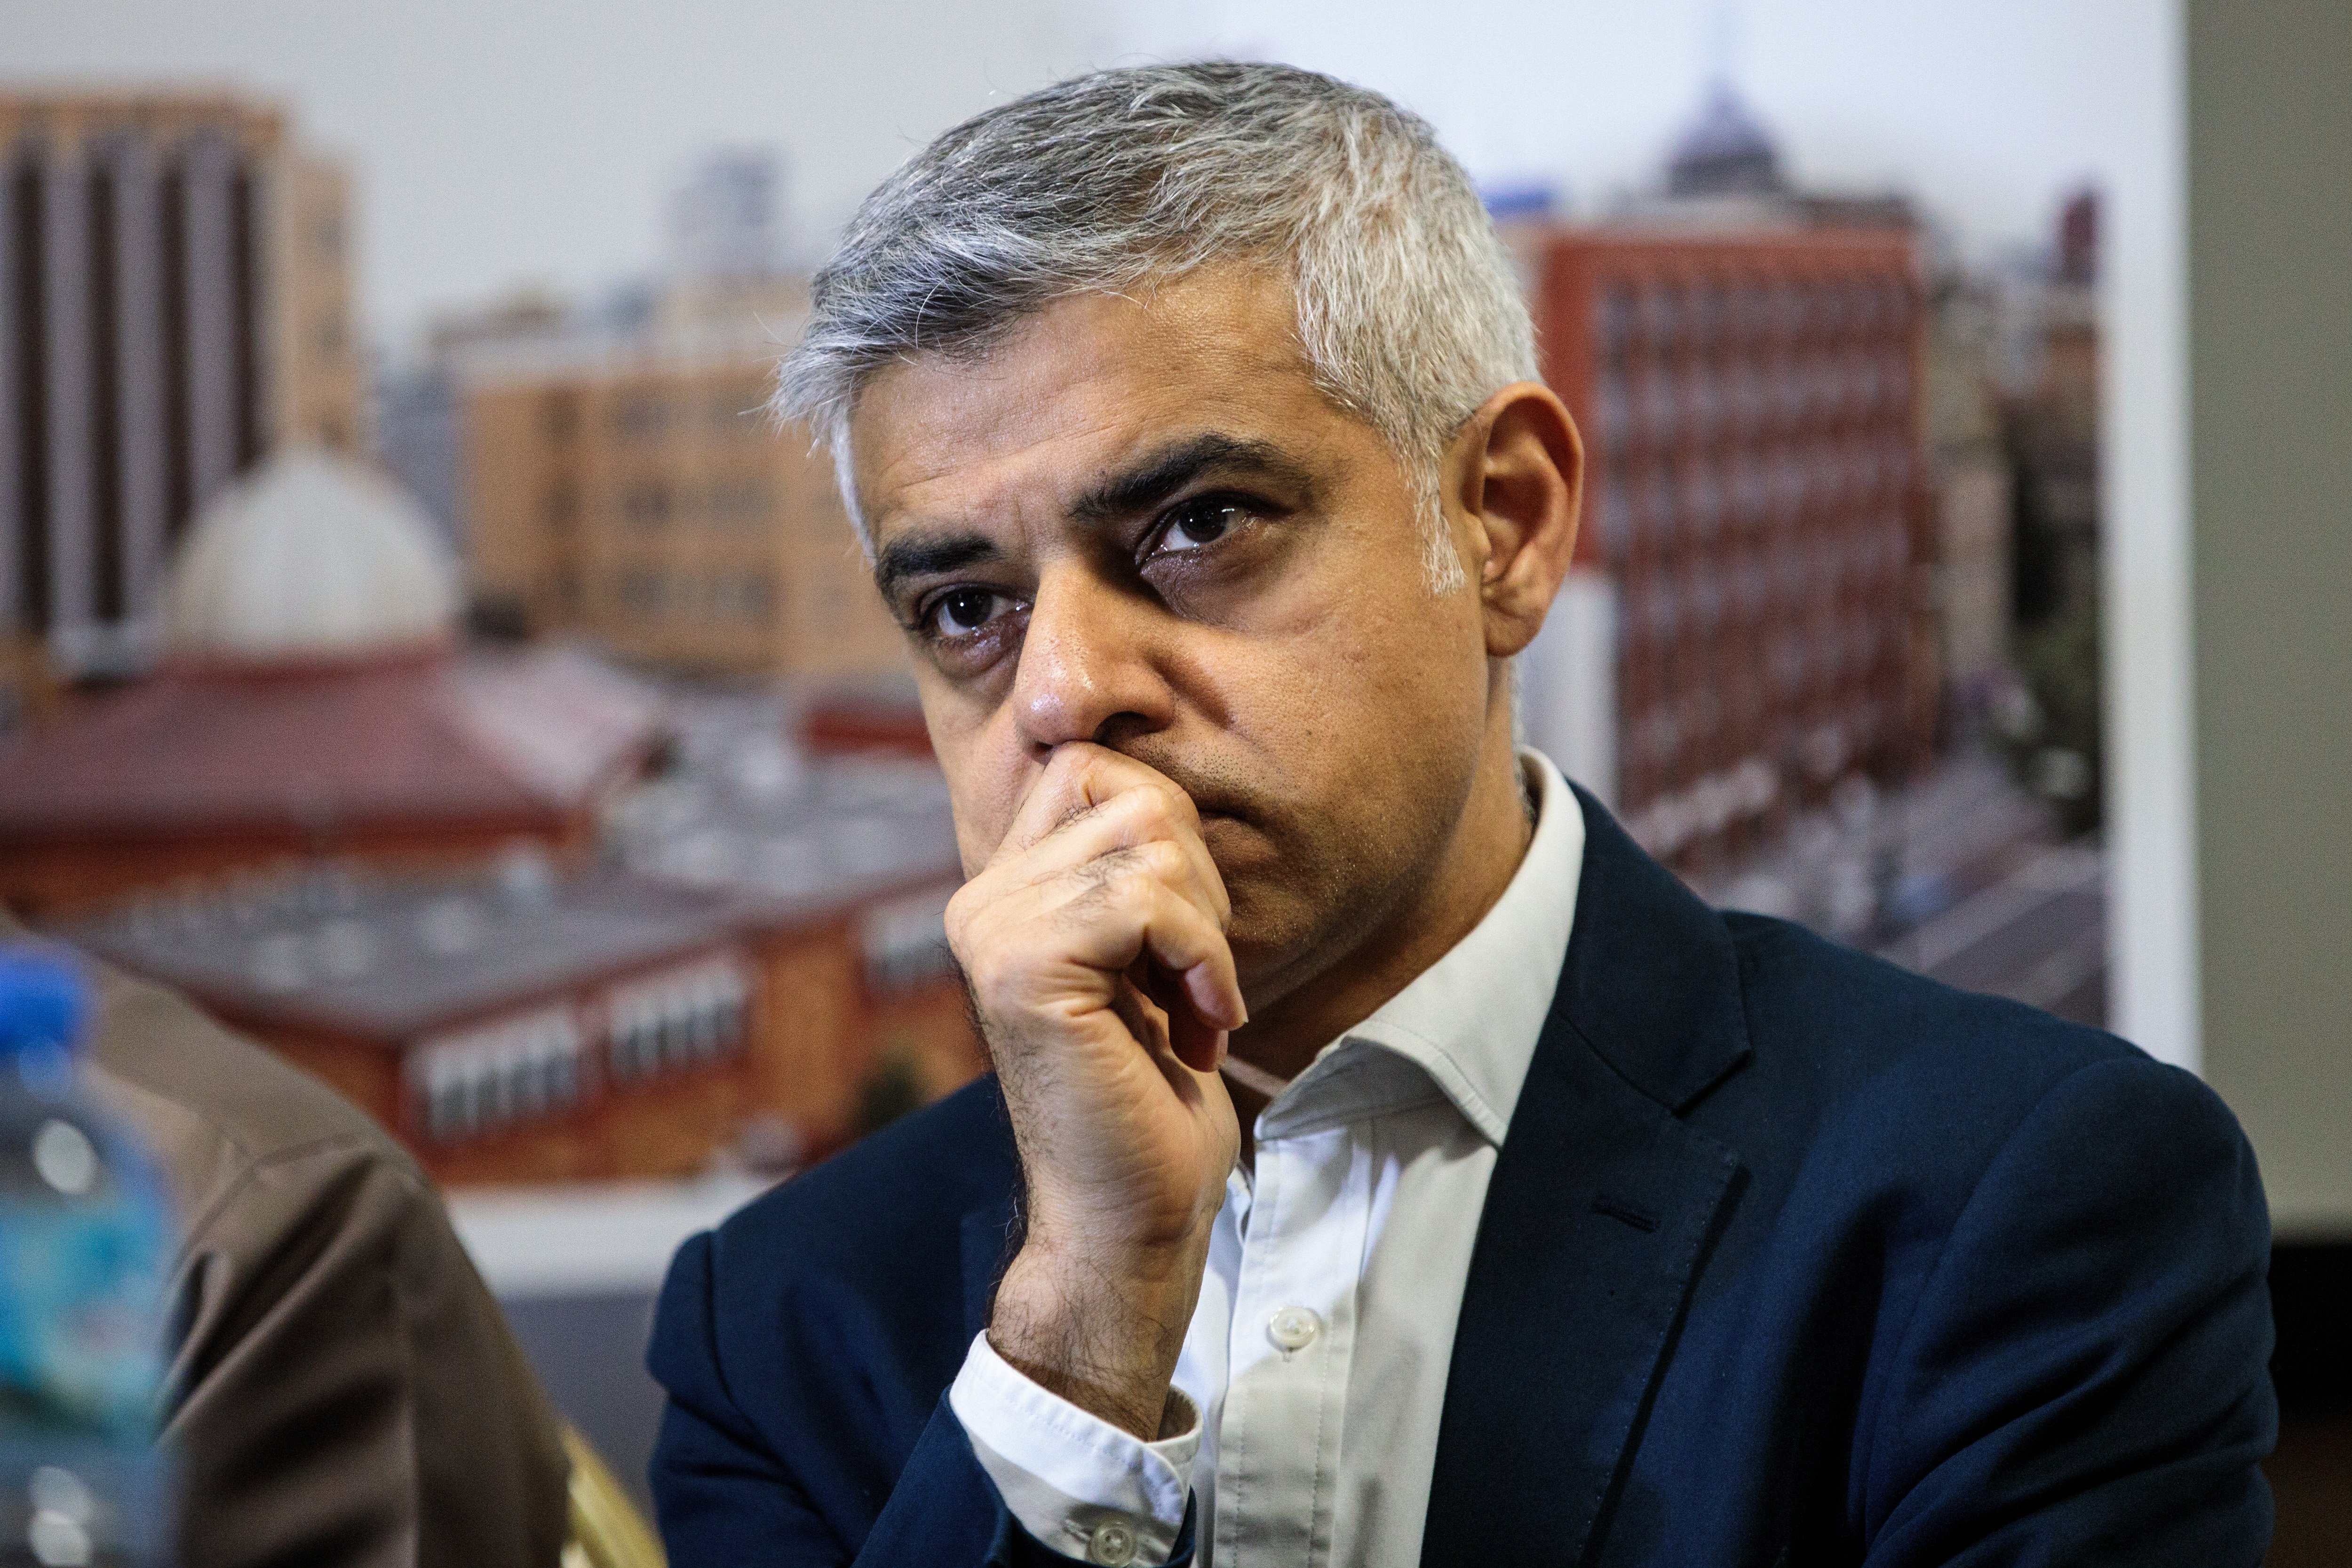 Sadiq Khan at a vigil for the victims of the New Zealand mosque attacks at the East London Mosque in London, England | Photo: Getty Images